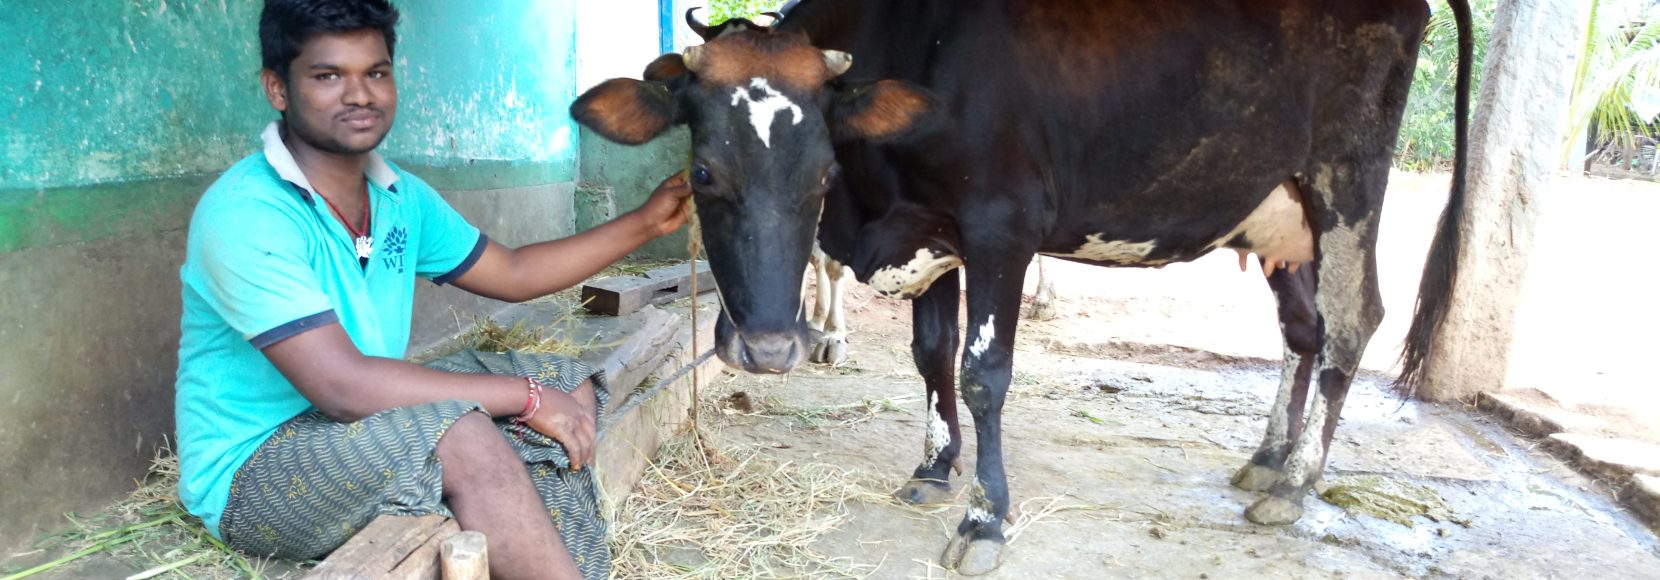 After graduating from the Cargill Agri Fellows program, Suresha purchased two high-yielding Jersey cows and planted fodder for them on his family farm. (TechnoServe)